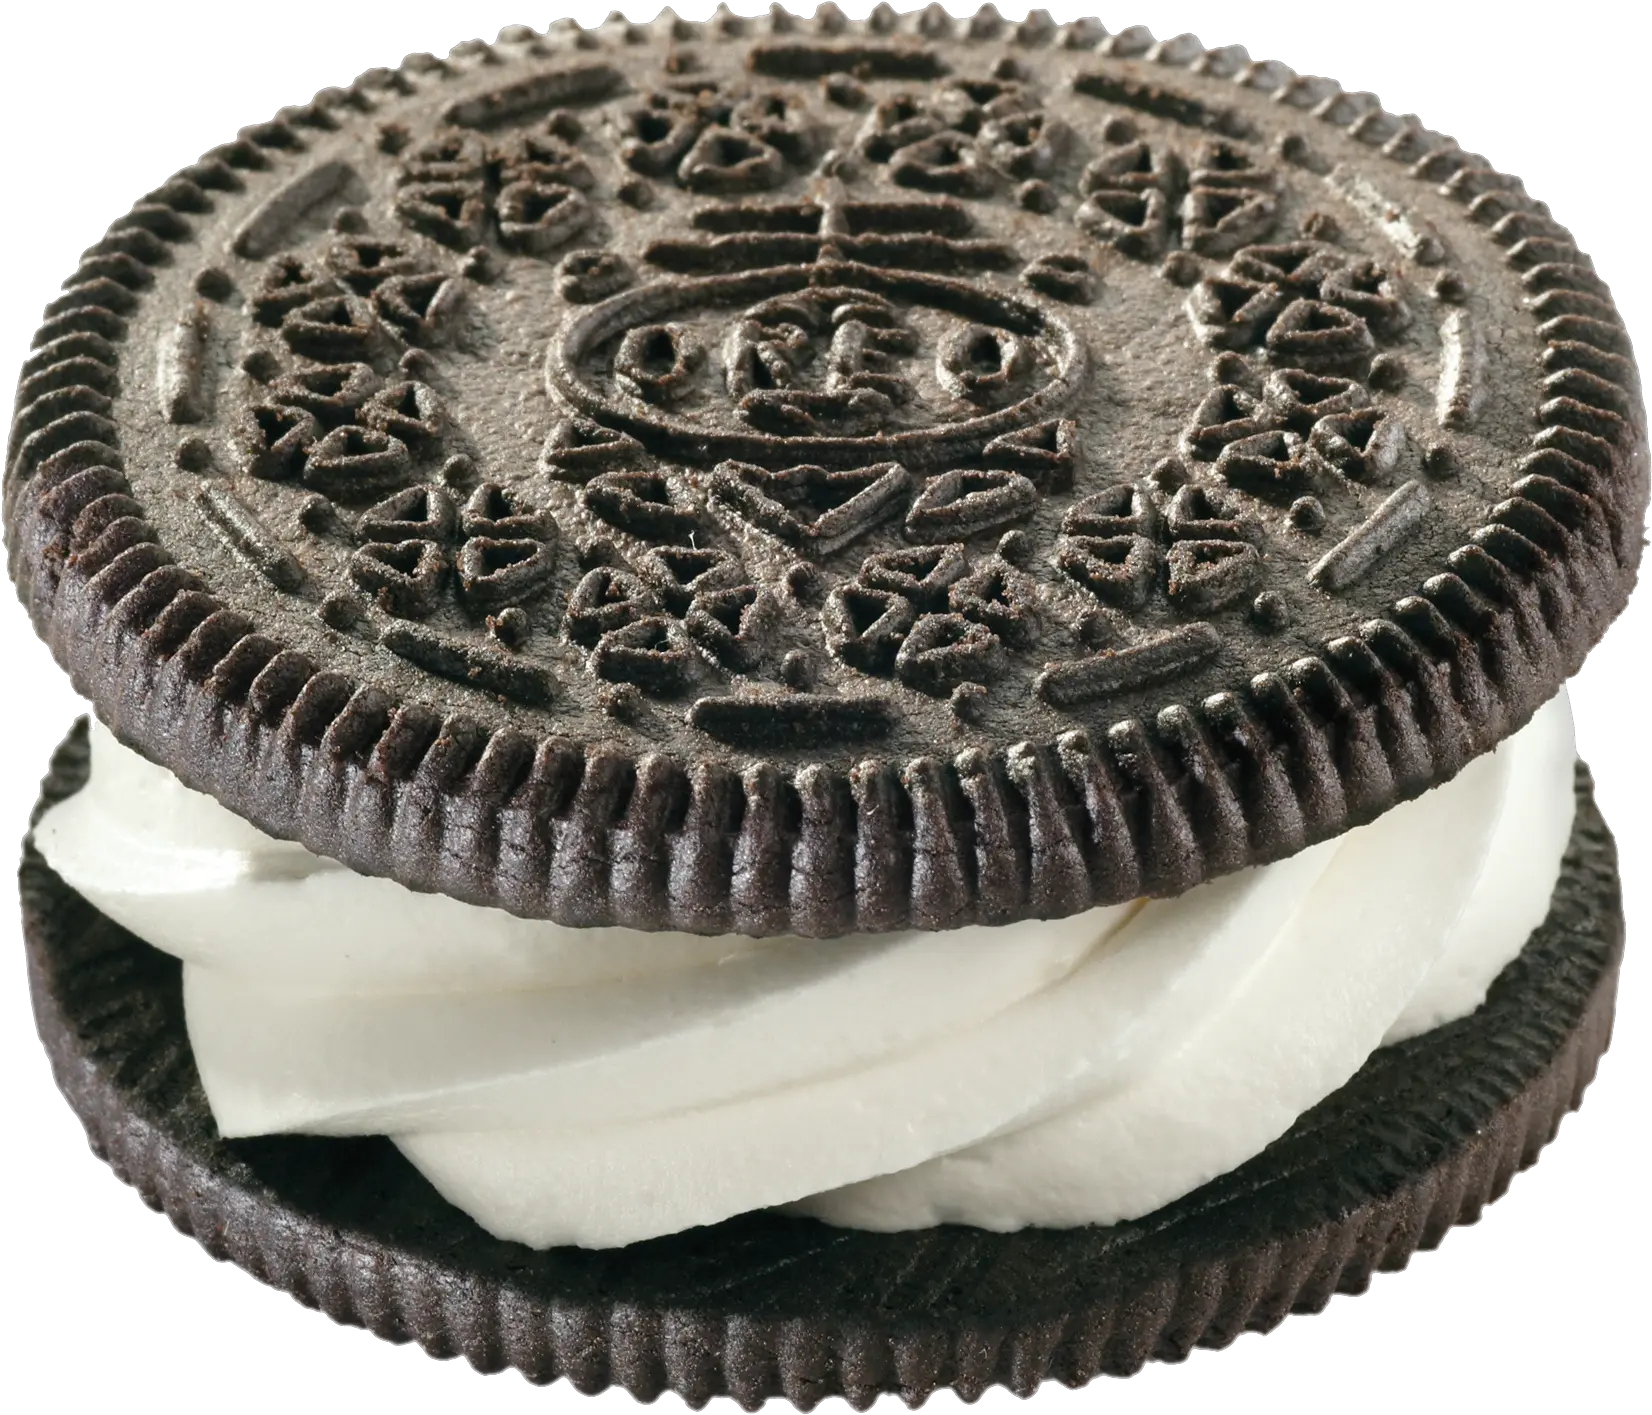 Oreo Cookie Png